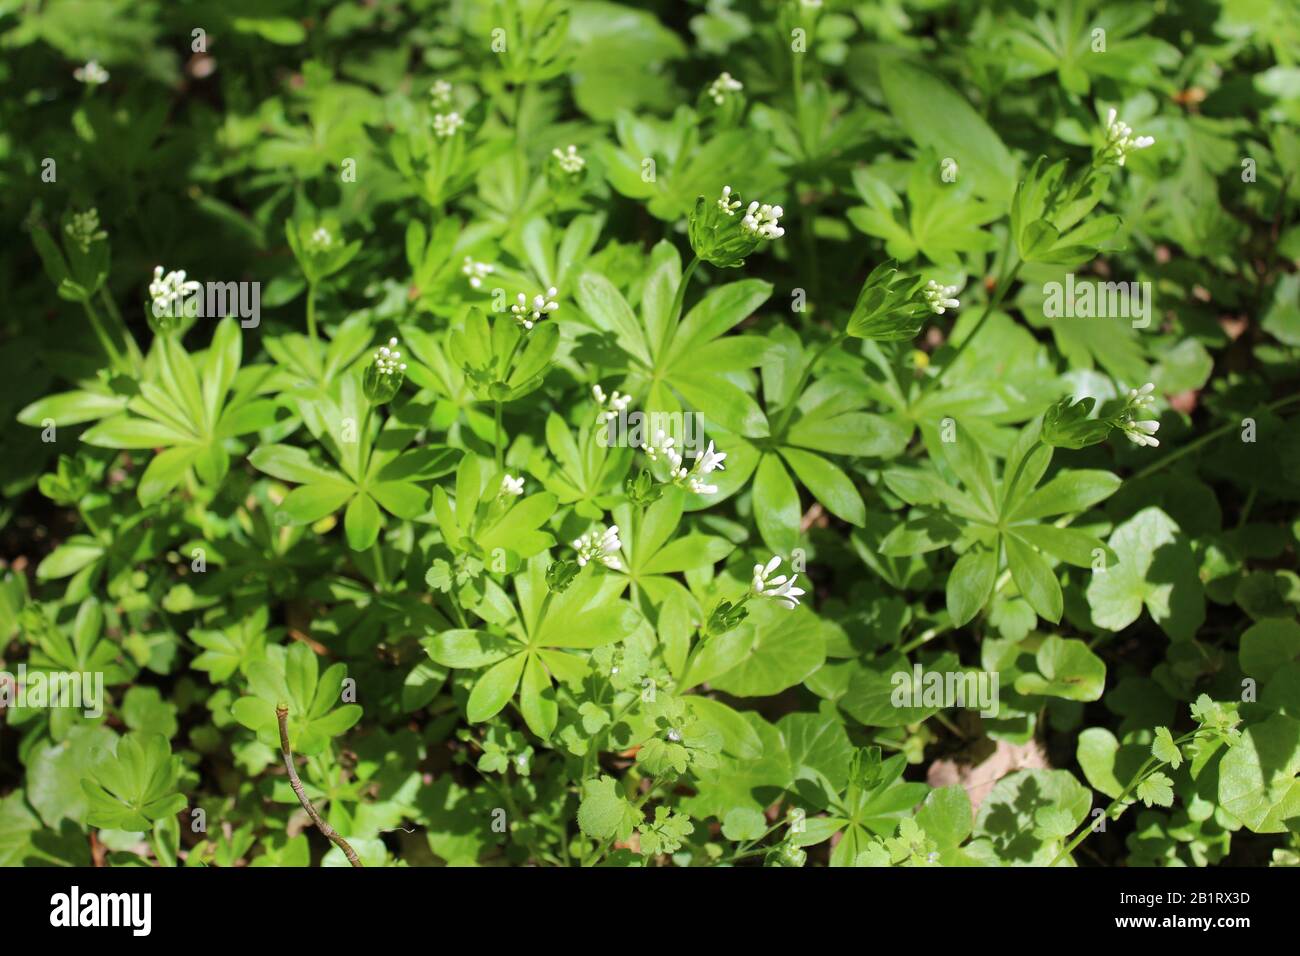 The picture shows a woodruff field in the forest Stock Photo